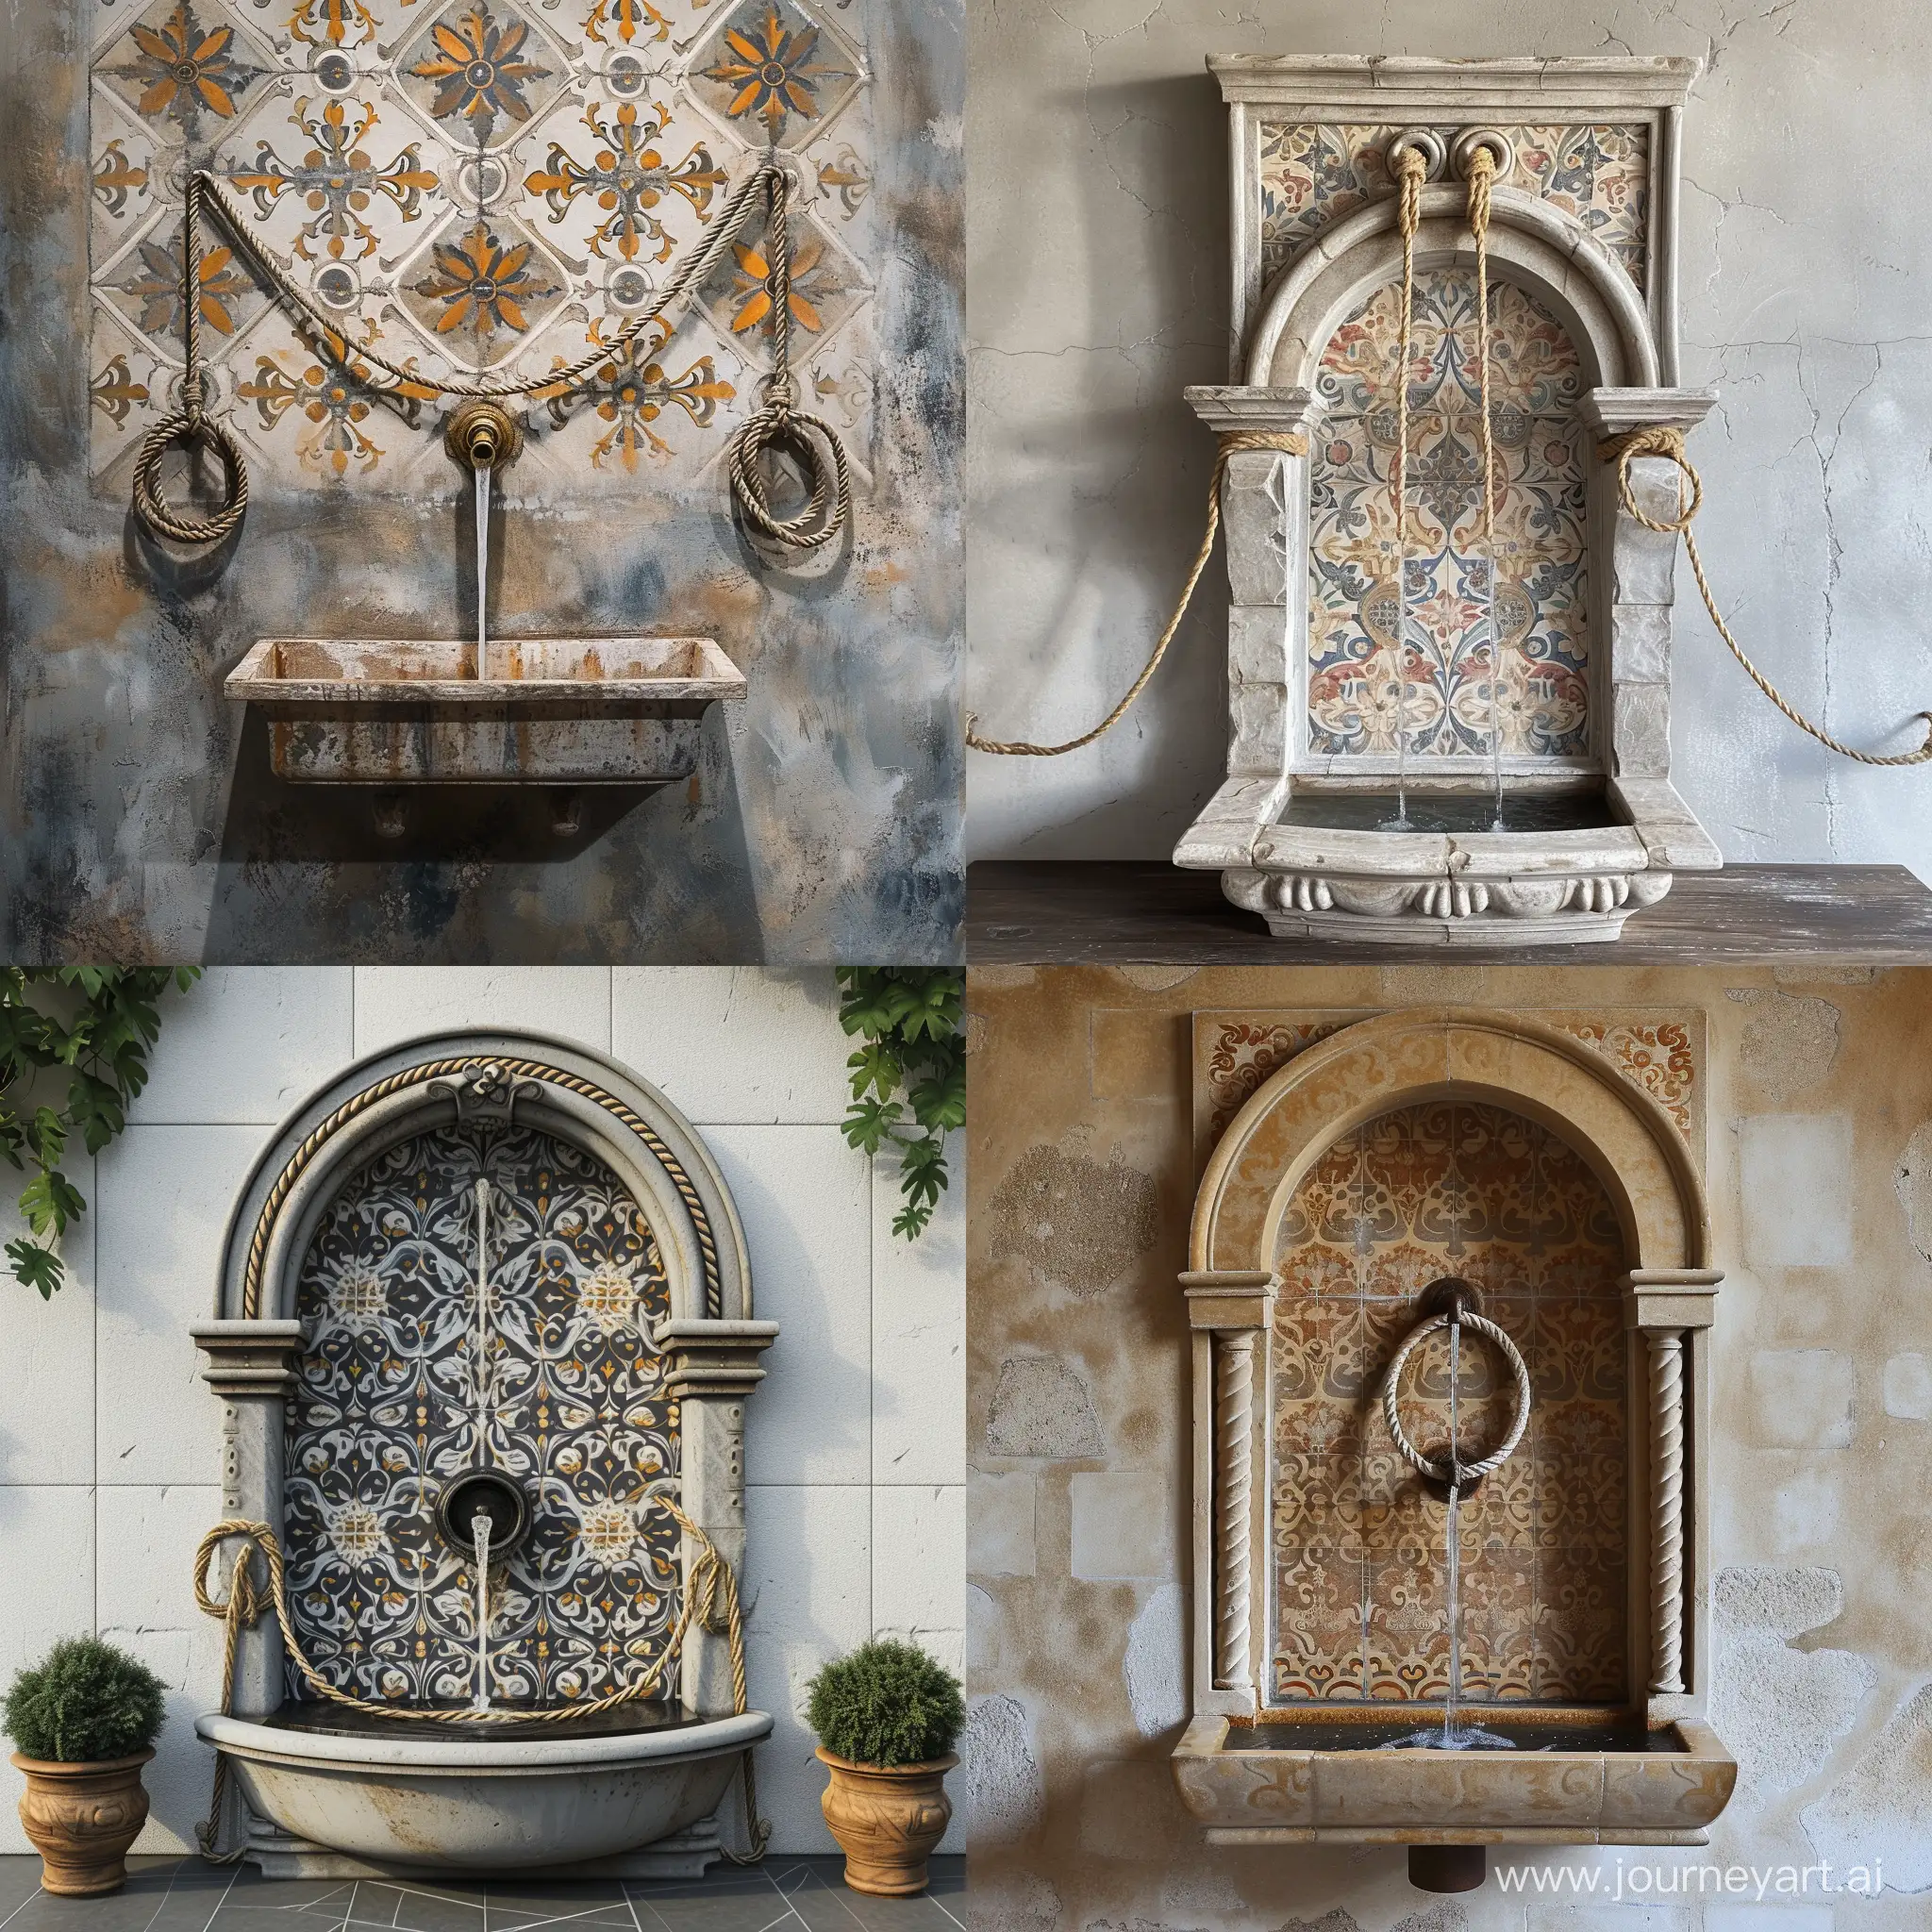 Elegant-Baroque-Wall-Fountain-with-Intricate-Patterns-and-Hanging-Ropes